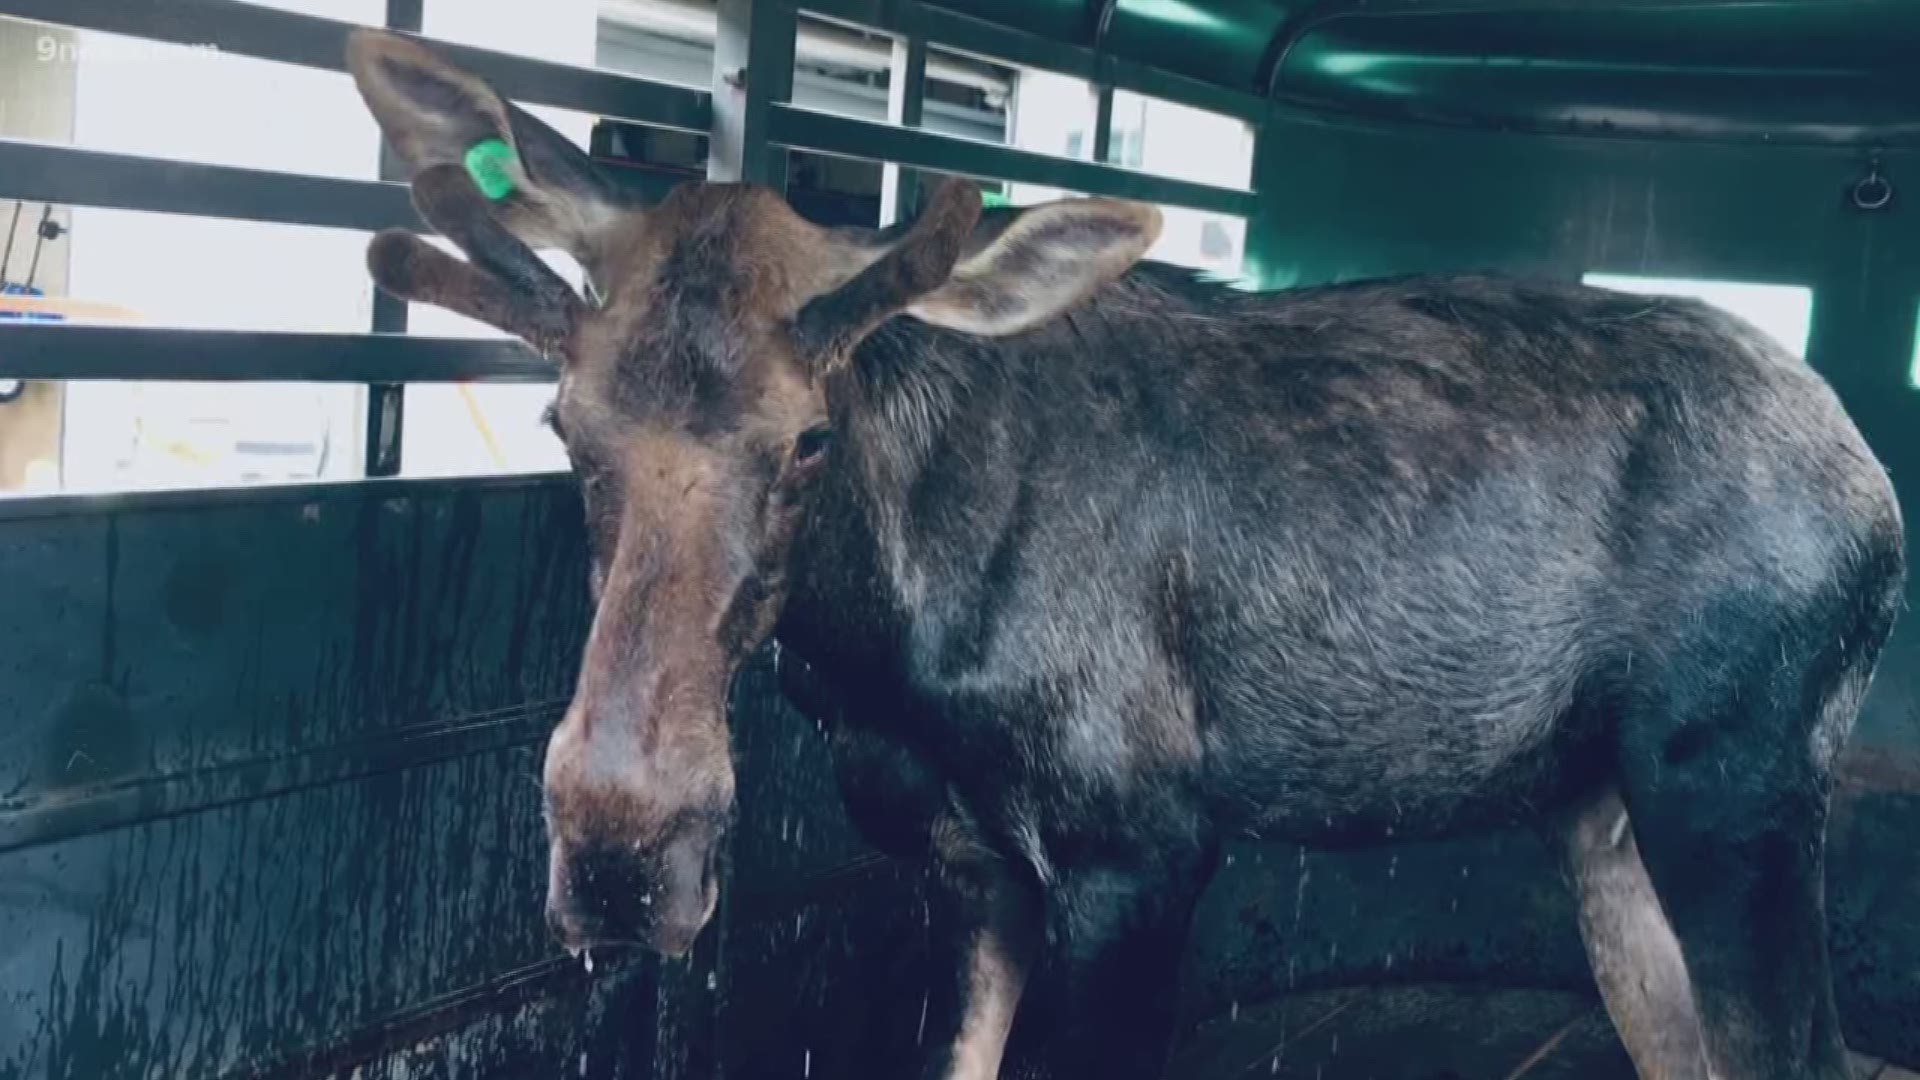 The moose was seen just off 104th Avenue Monday morning, but was caught and is being relocated, according to Colorado Parks and Wildlife.